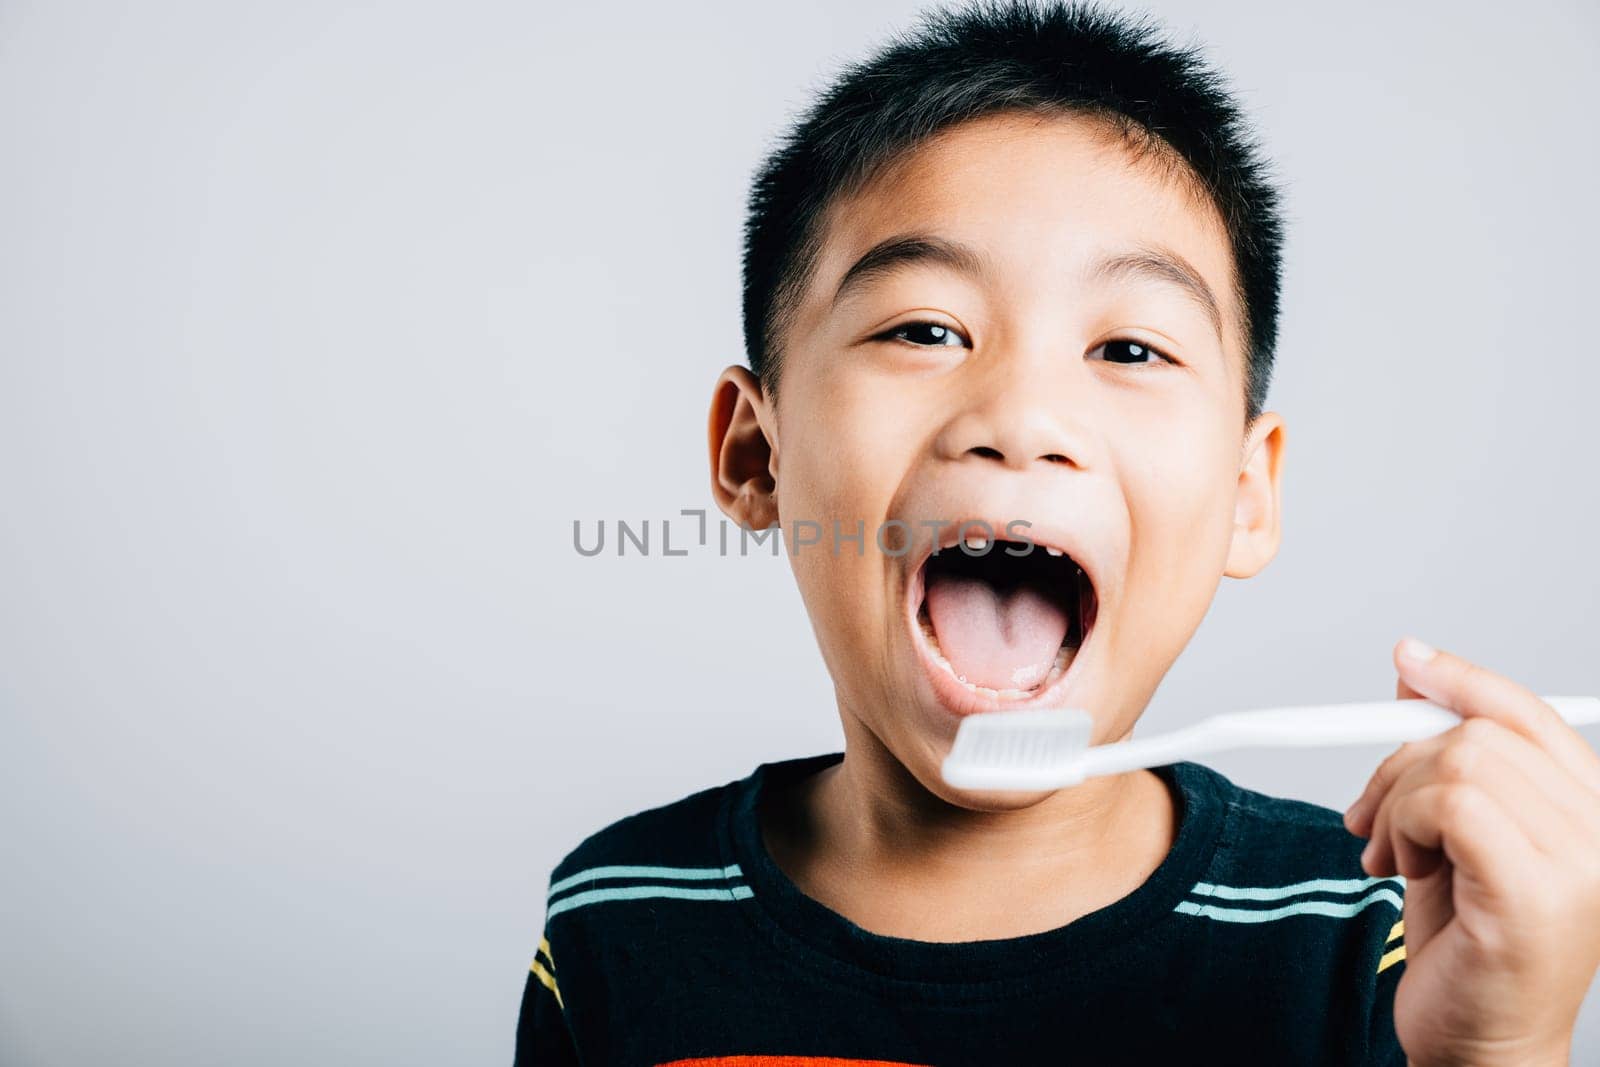 Isolated on a white background an Asian child without an upper milk tooth holds a toothbrush promoting dental hygiene routine and the joy of learning with a cheerful smile. Children dentist routine